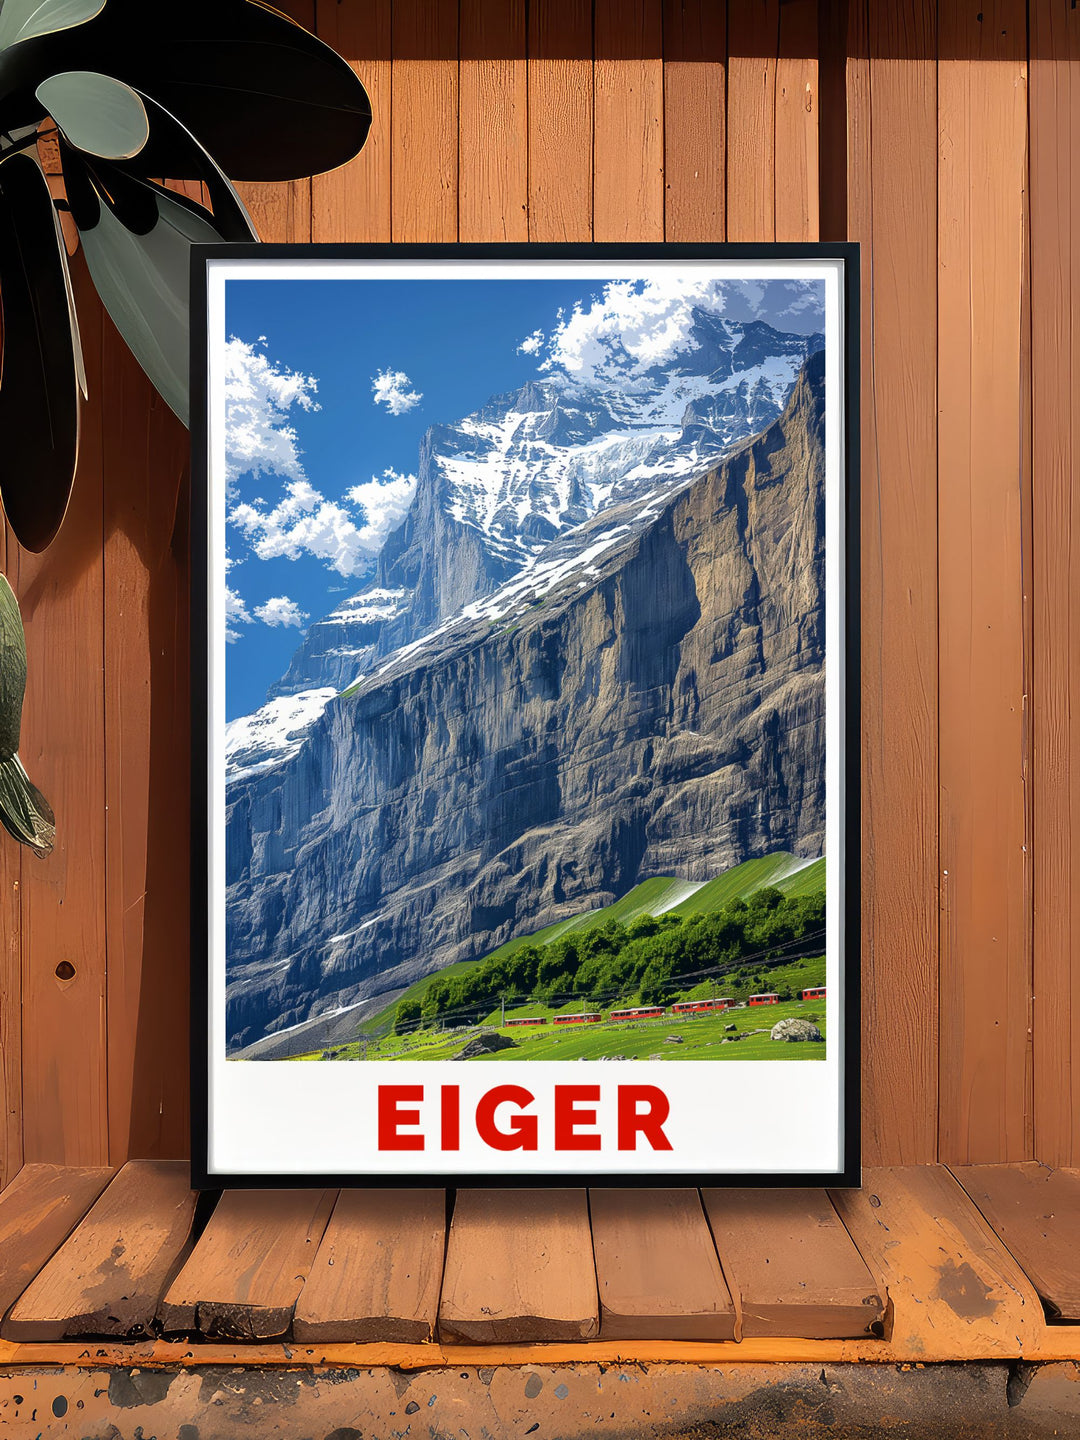 Vintage travel print of Eiger North Face capturing the dramatic cliffs and alpine scenery of this iconic Swiss mountain ideal for those who love retro travel posters and want to add a sense of adventure to their home decor.